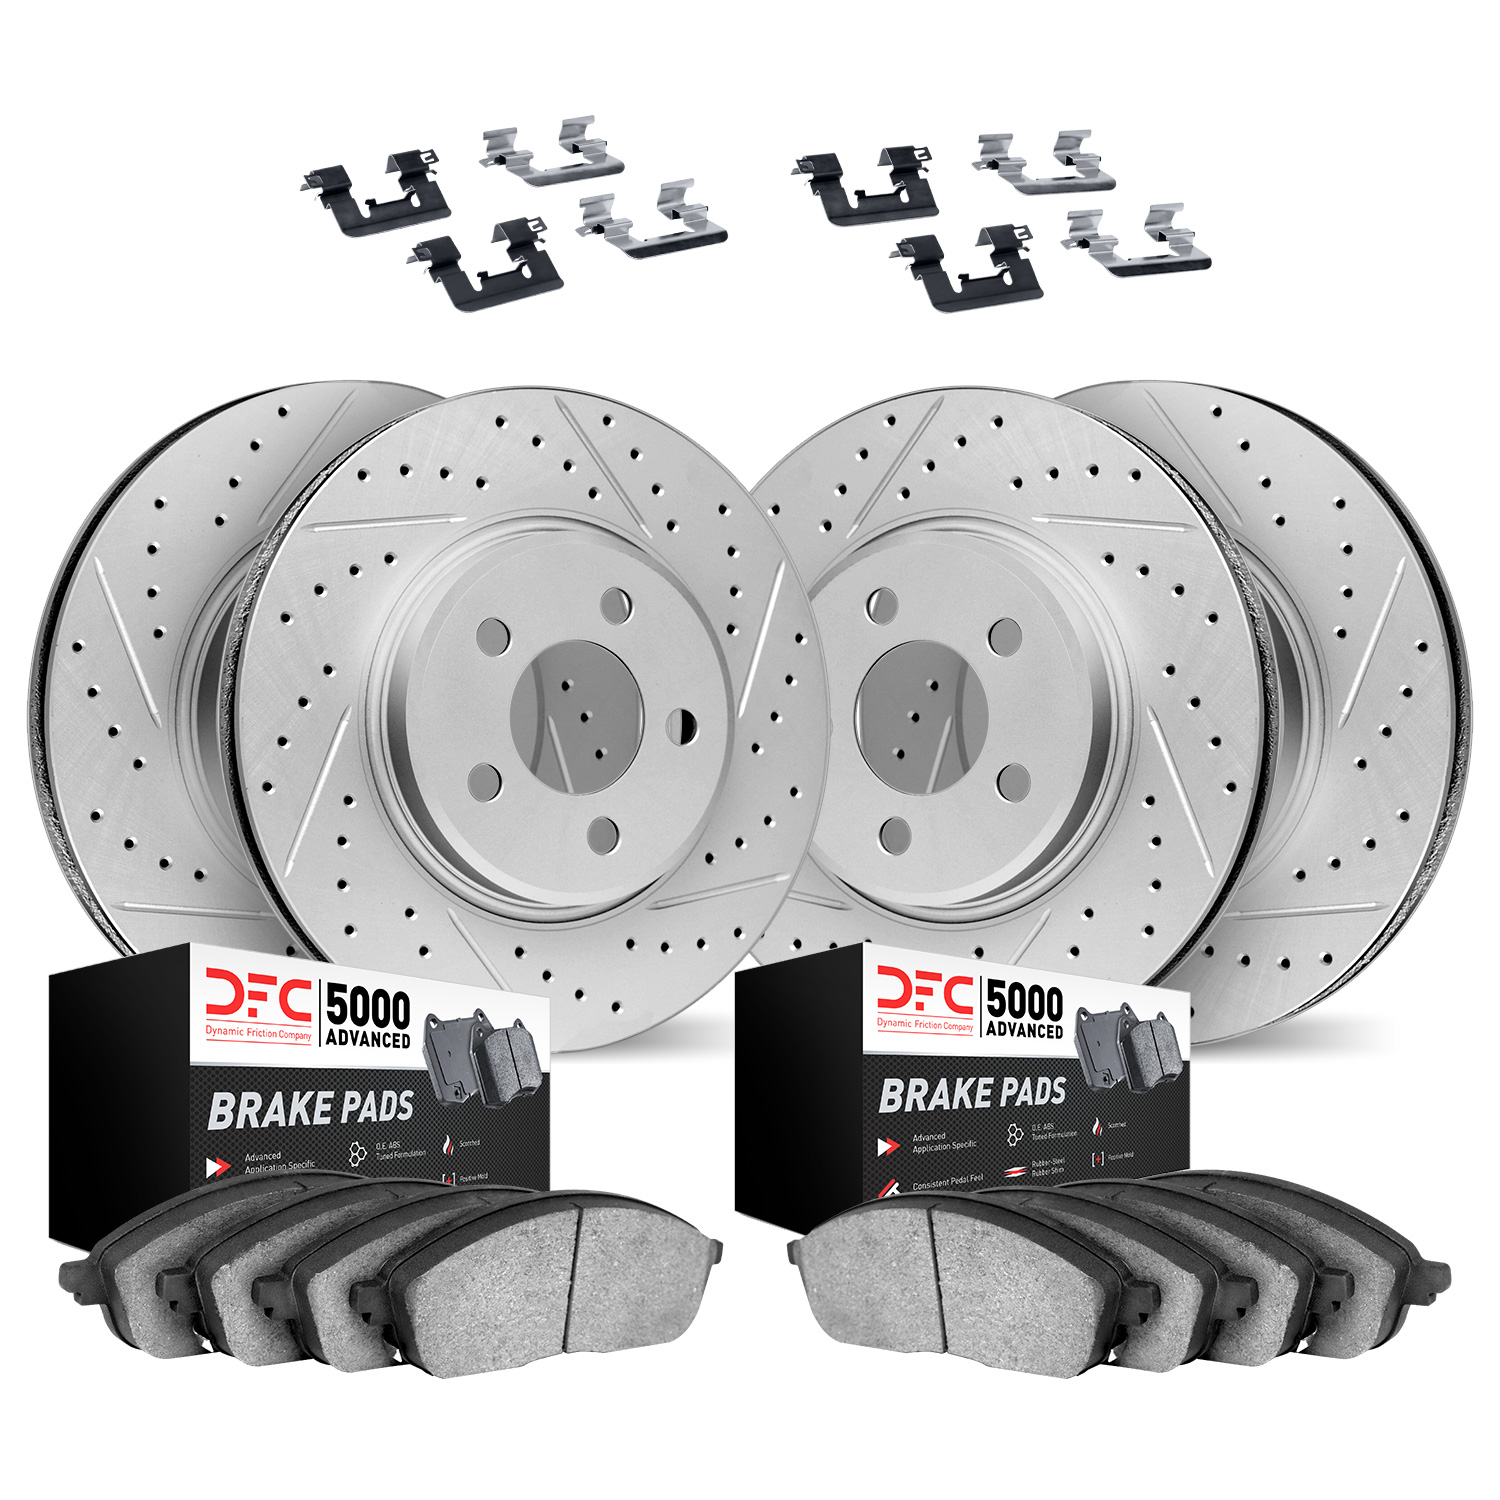 2514-13019 Geoperformance Drilled/Slotted Rotors w/5000 Advanced Brake Pads Kit & Hardware, Fits Select Subaru, Position: Front